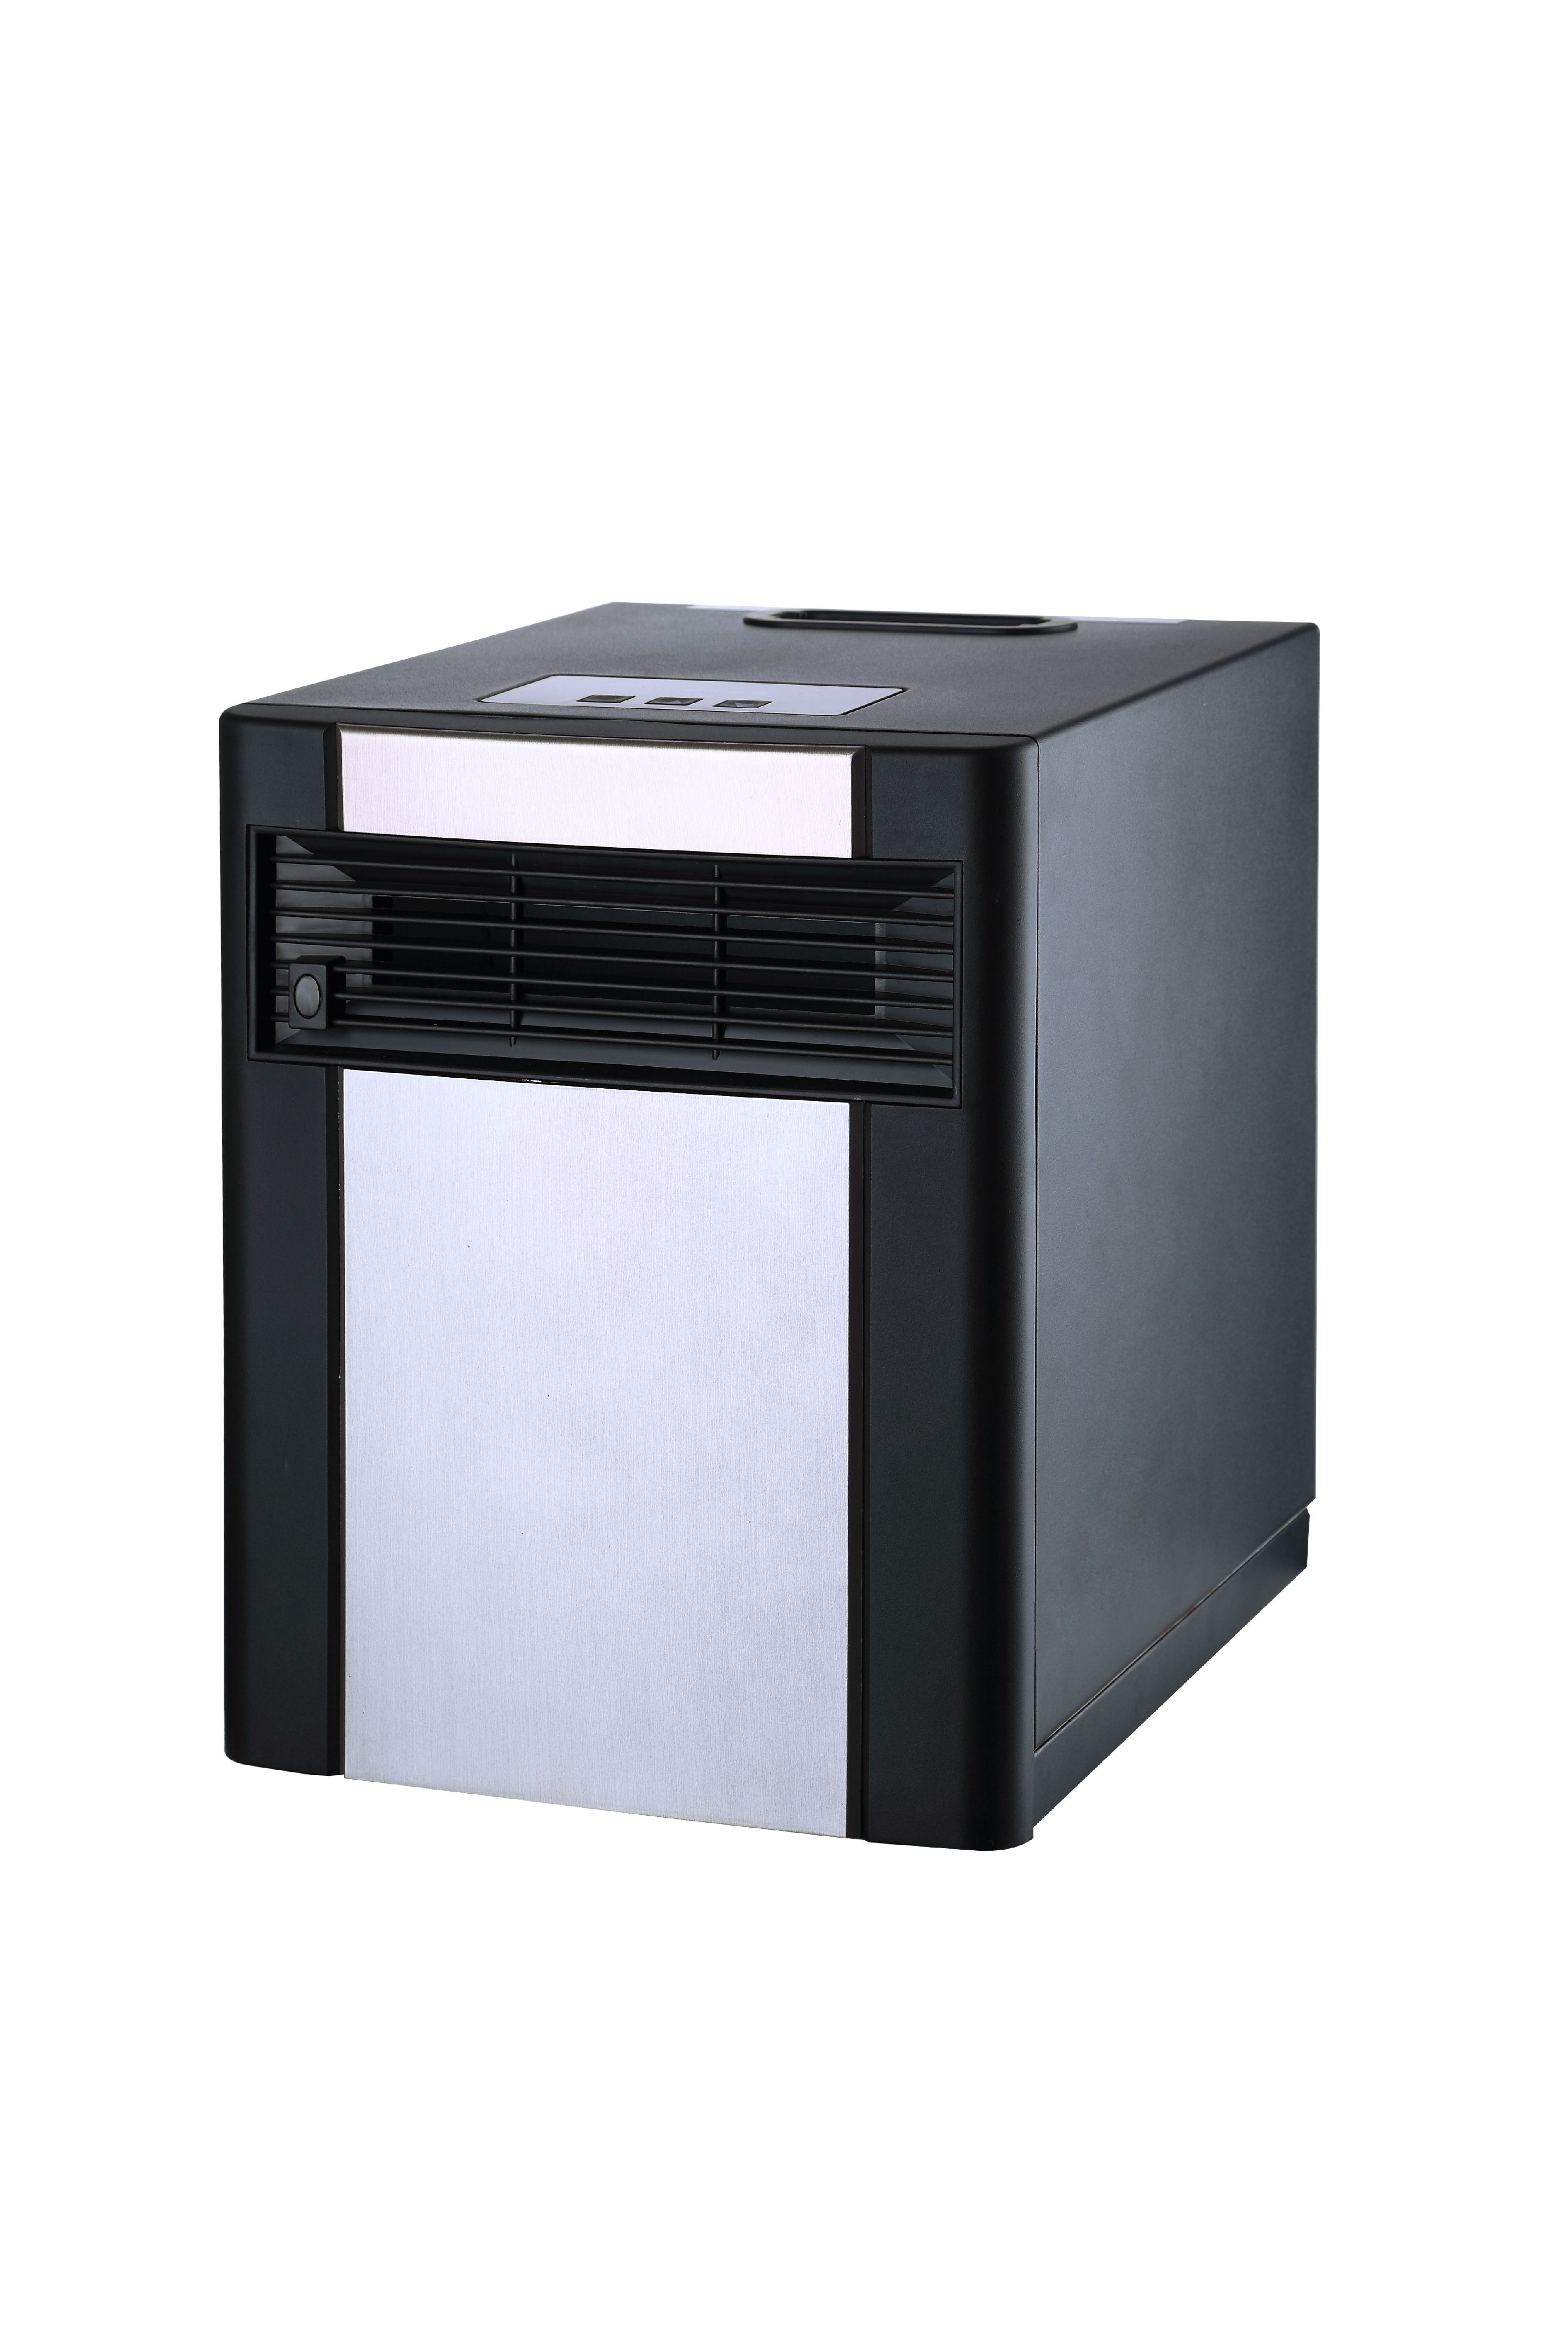 Mainstays Infrared Electric Cabinet Heater, Black/Grey, DF1515 - image 2 of 7